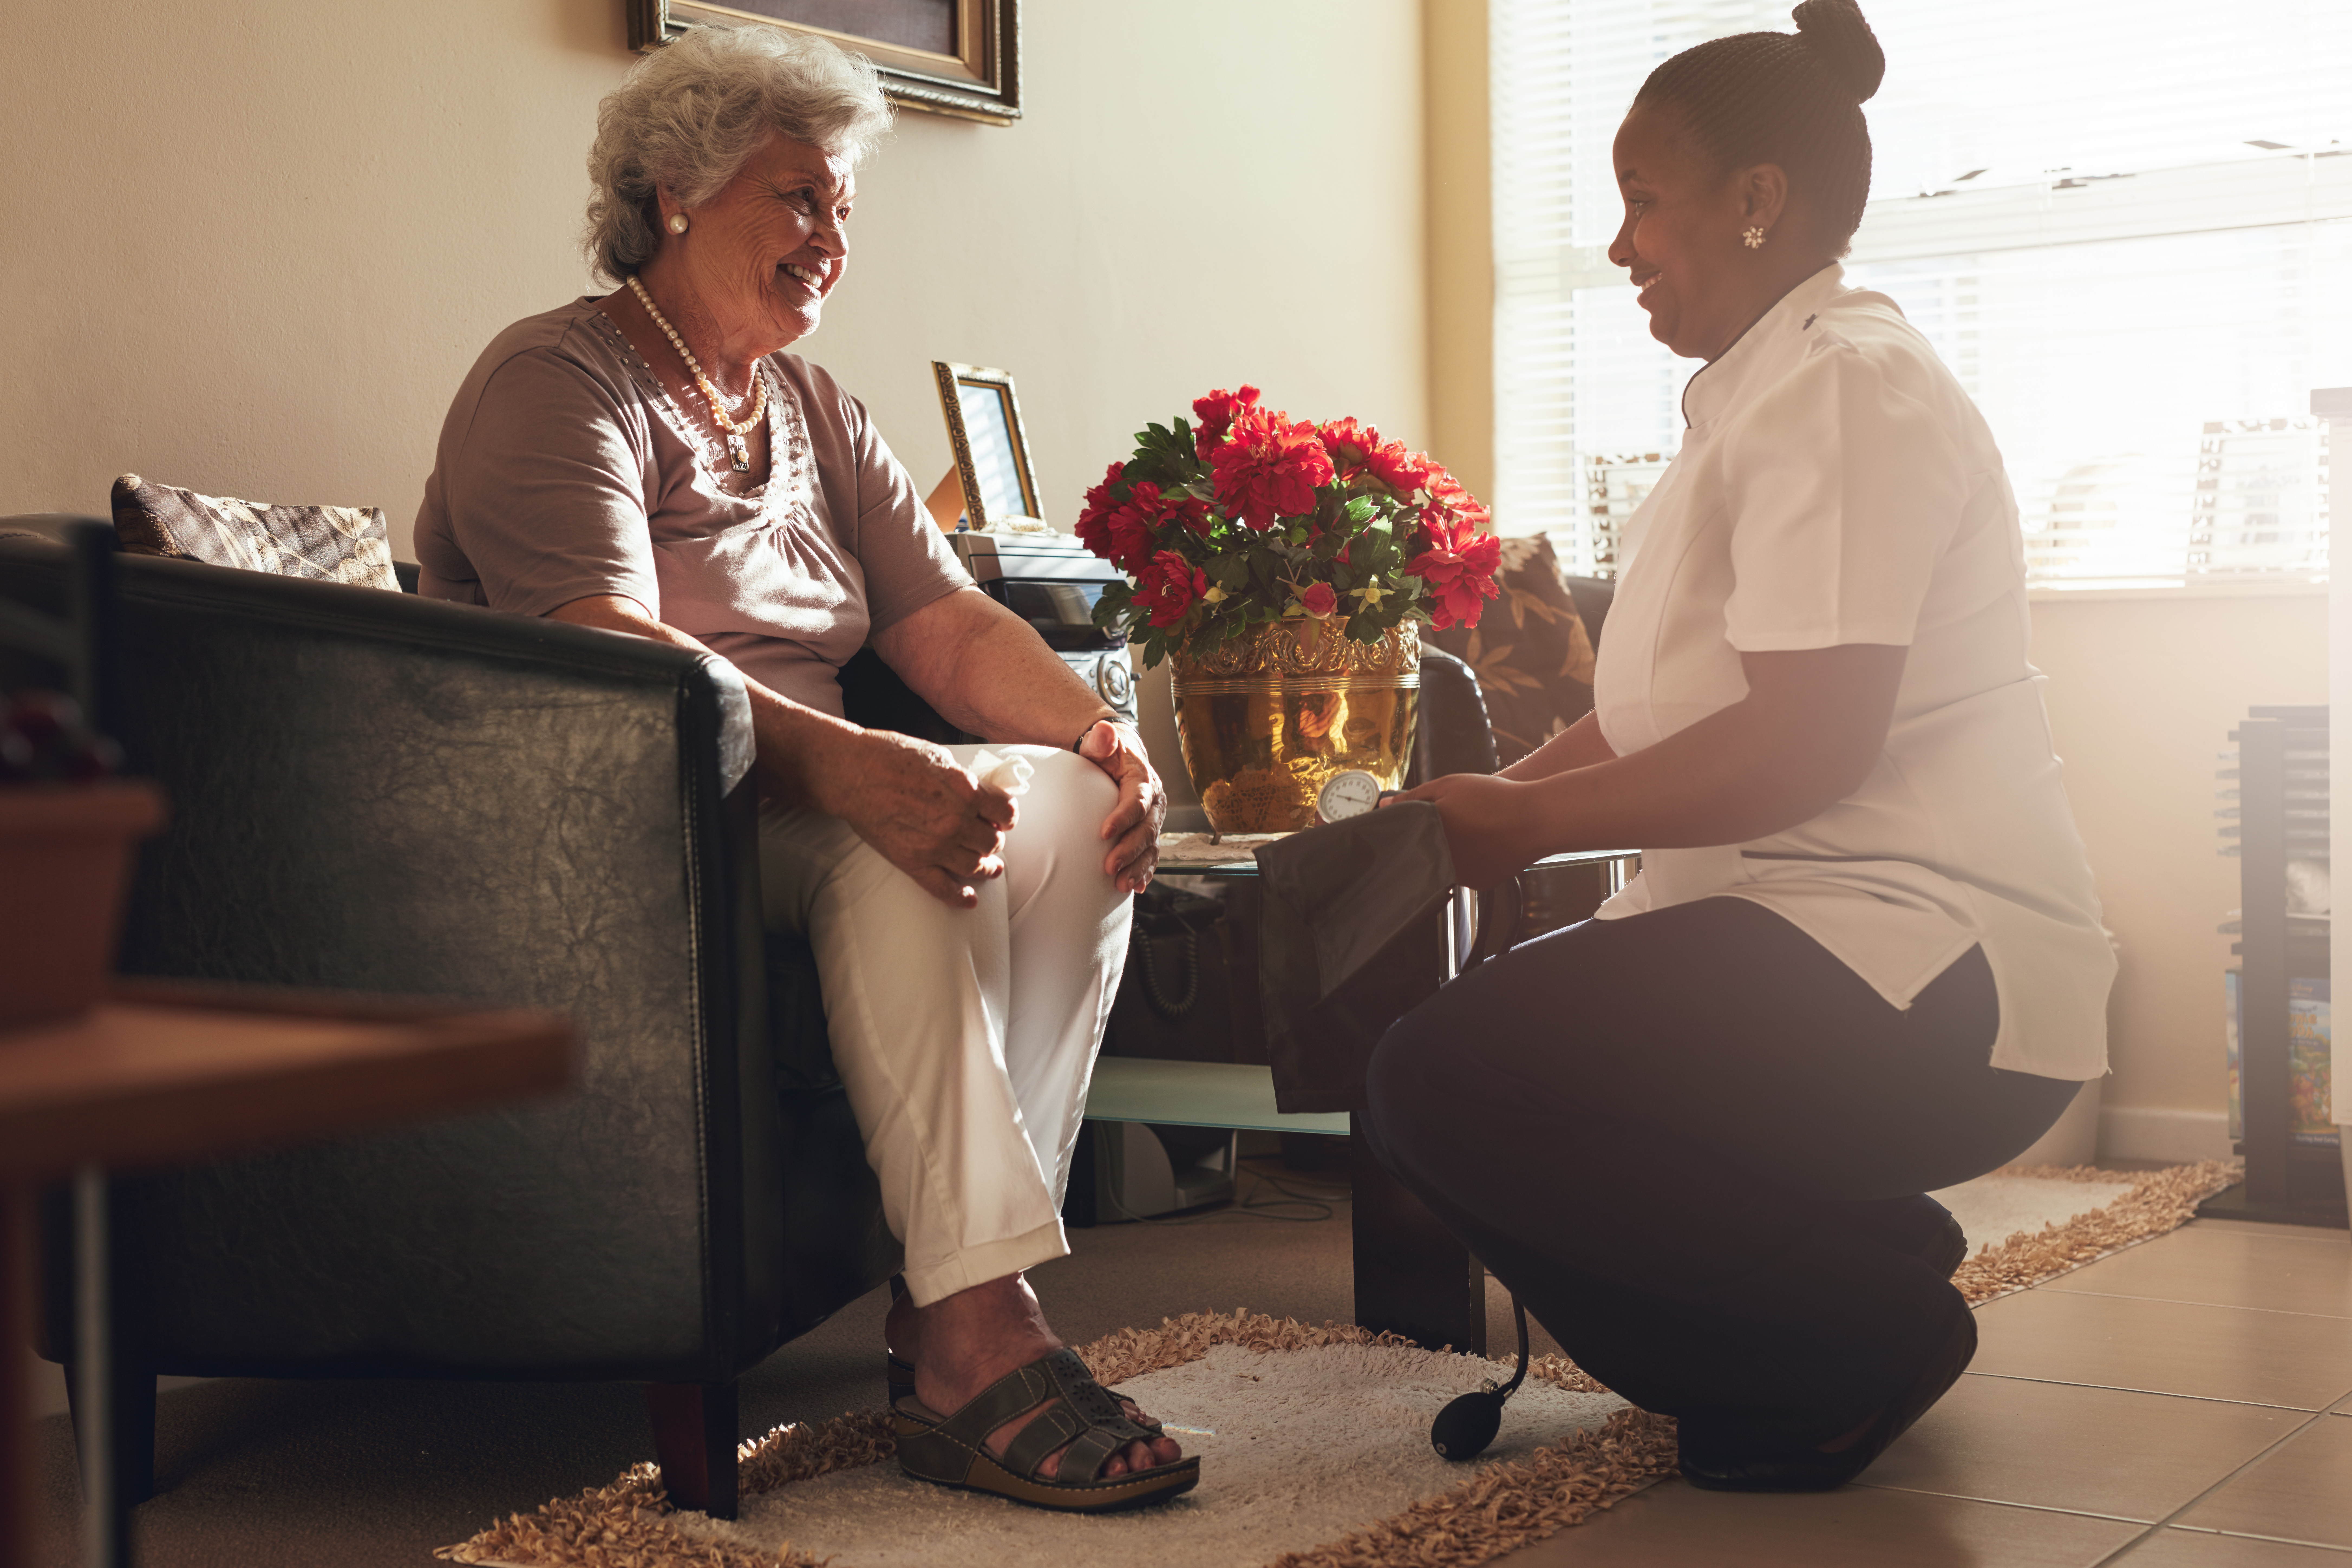 Home Health Care Benefits Patients Facing Many Conditions, Illnesses and Injuries